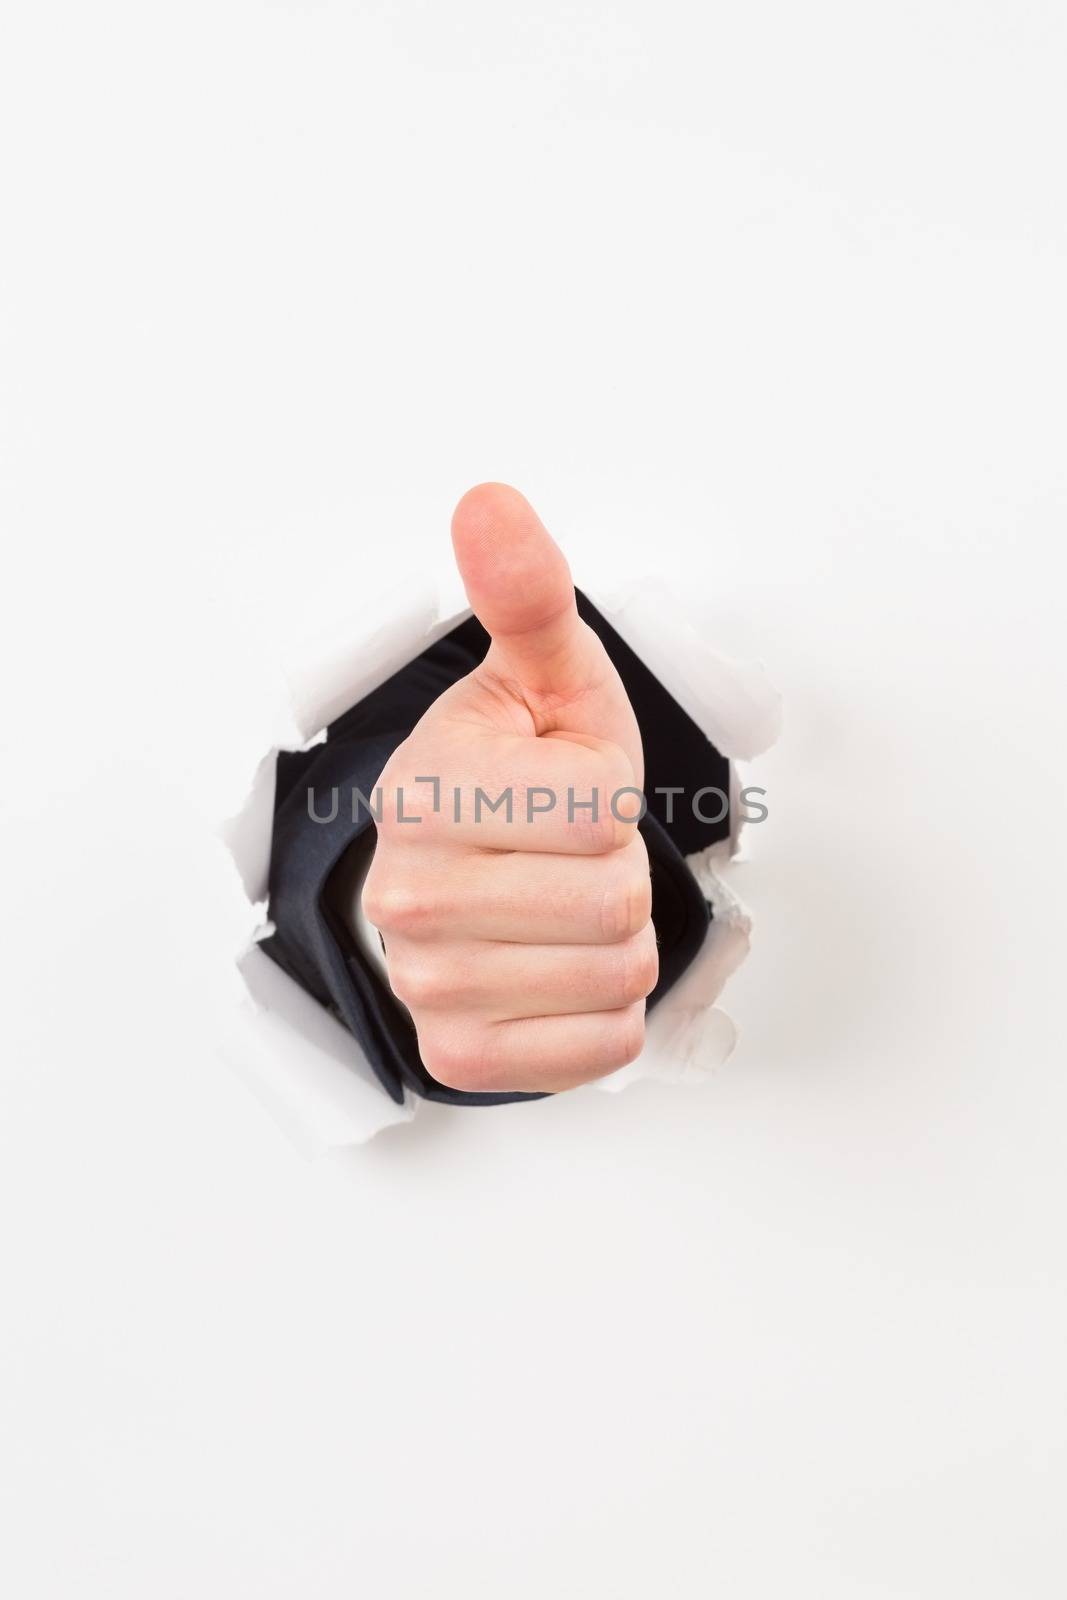 Thumbs up bursting through paper by Wavebreakmedia